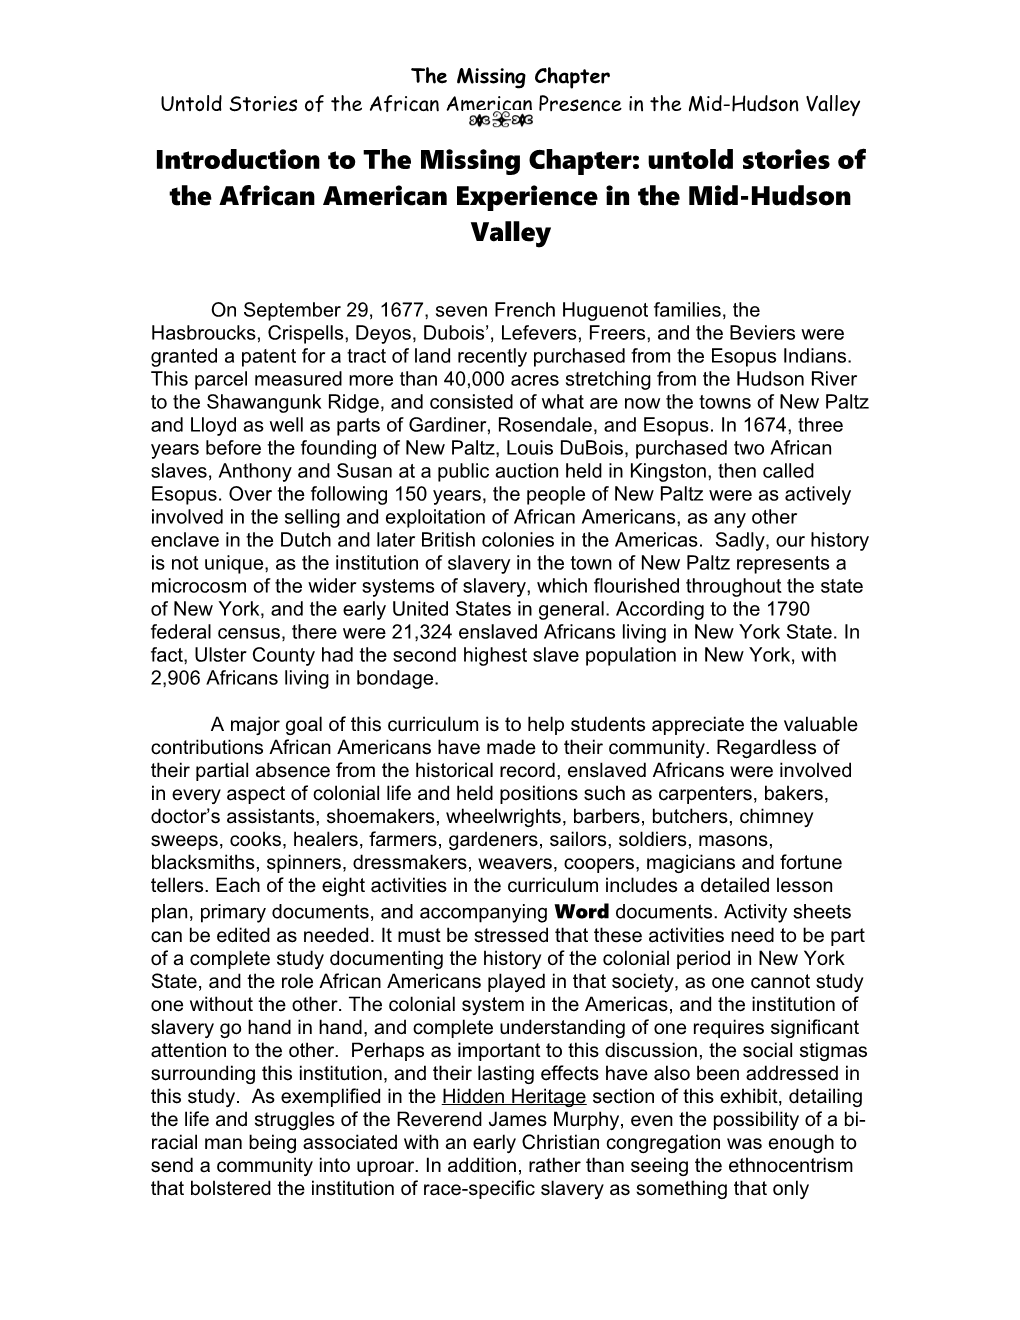 Introduction to the Missing Chapter: Untold Stories of the African American Experience